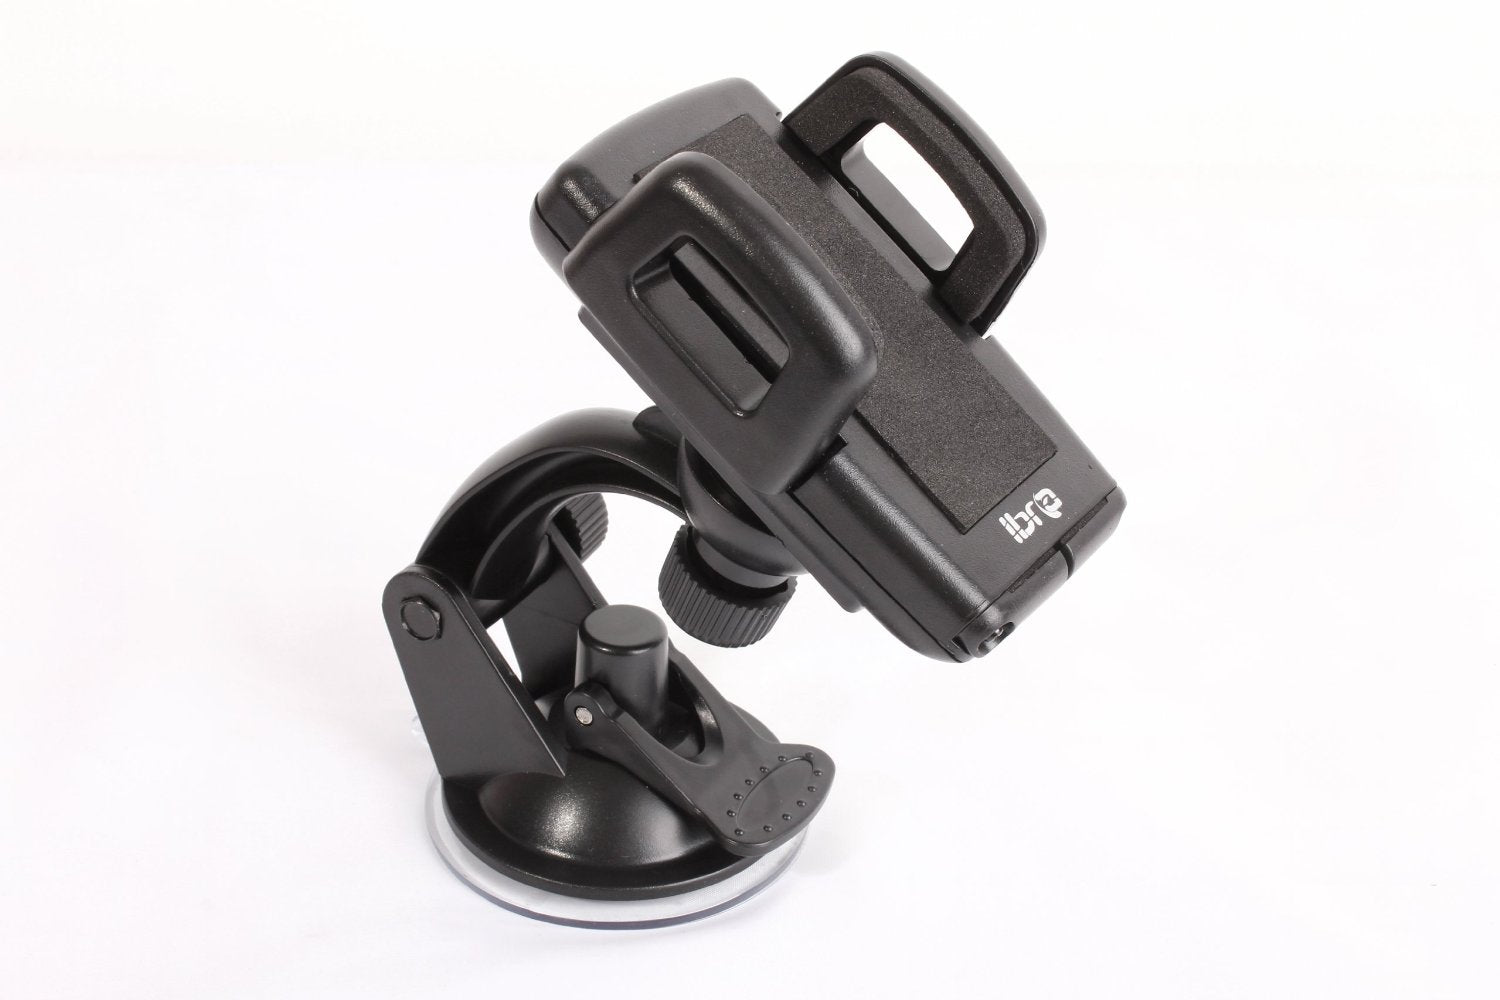 IBRA Windshield Car Mount Holder for iPhone 6 / 6 Plus 5 5C 5S 4S 4 3GS Samsung Galaxy S2 S3 S4 S5